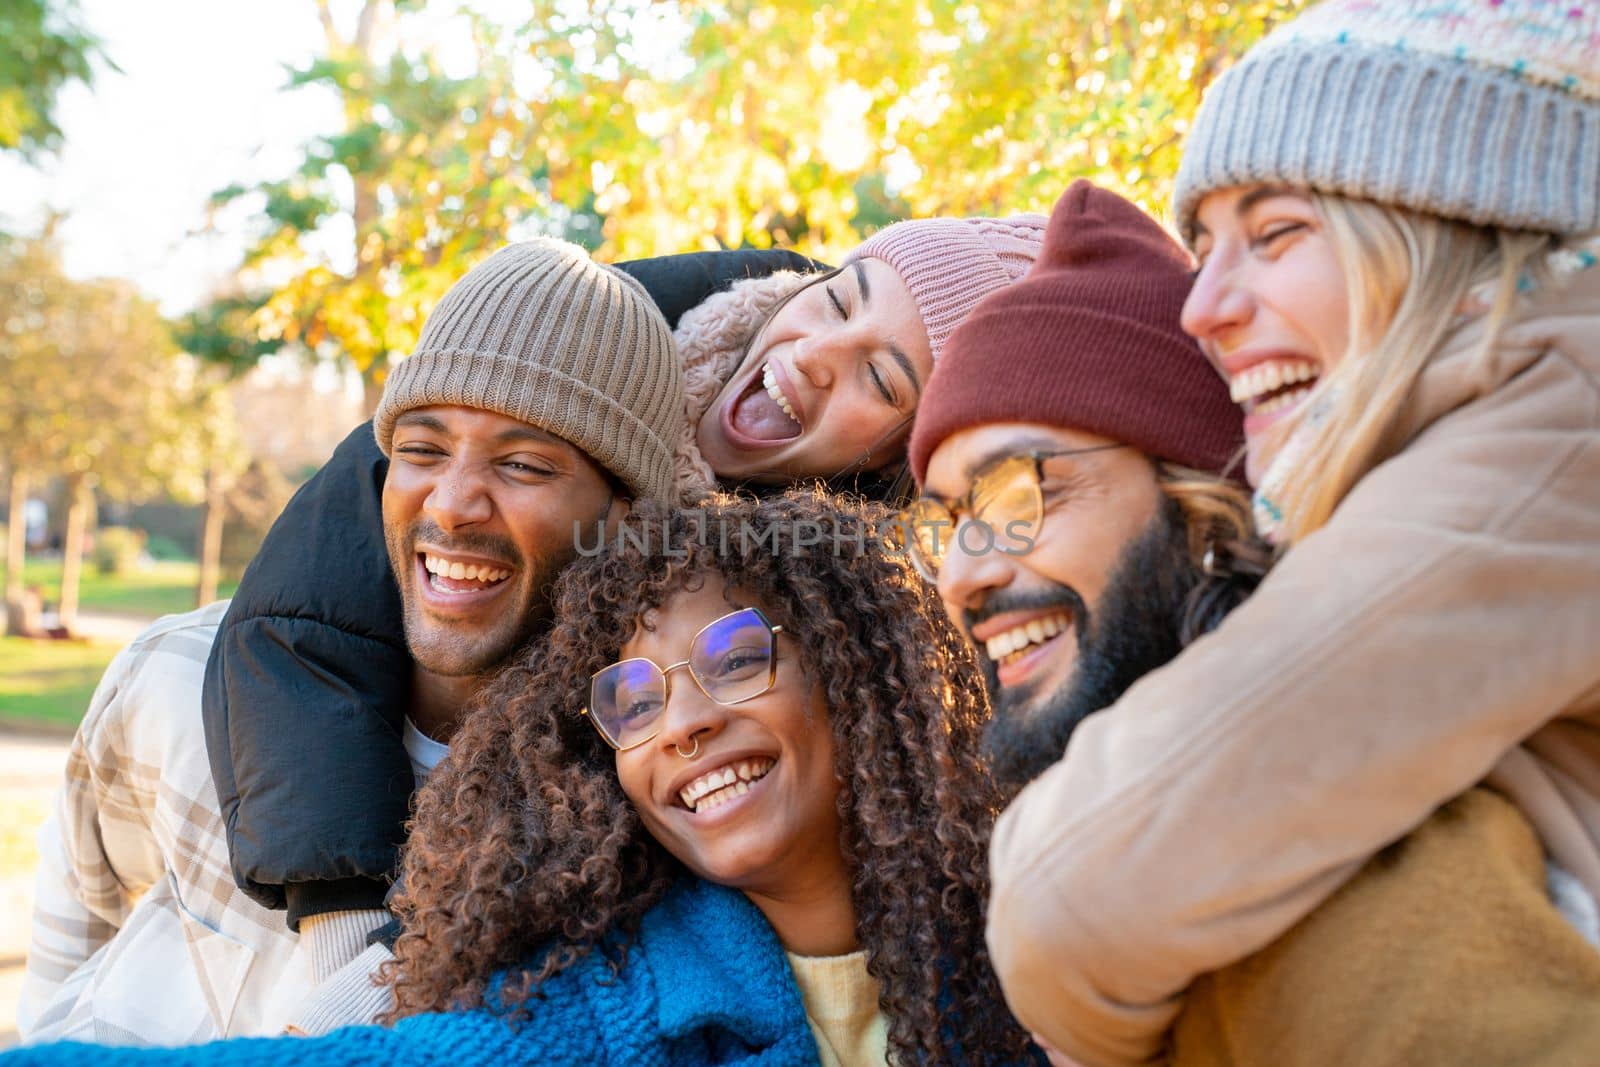 Cheerful group of friends taking smiling selfie. Happy people having fun together outdoors. by PaulCarr